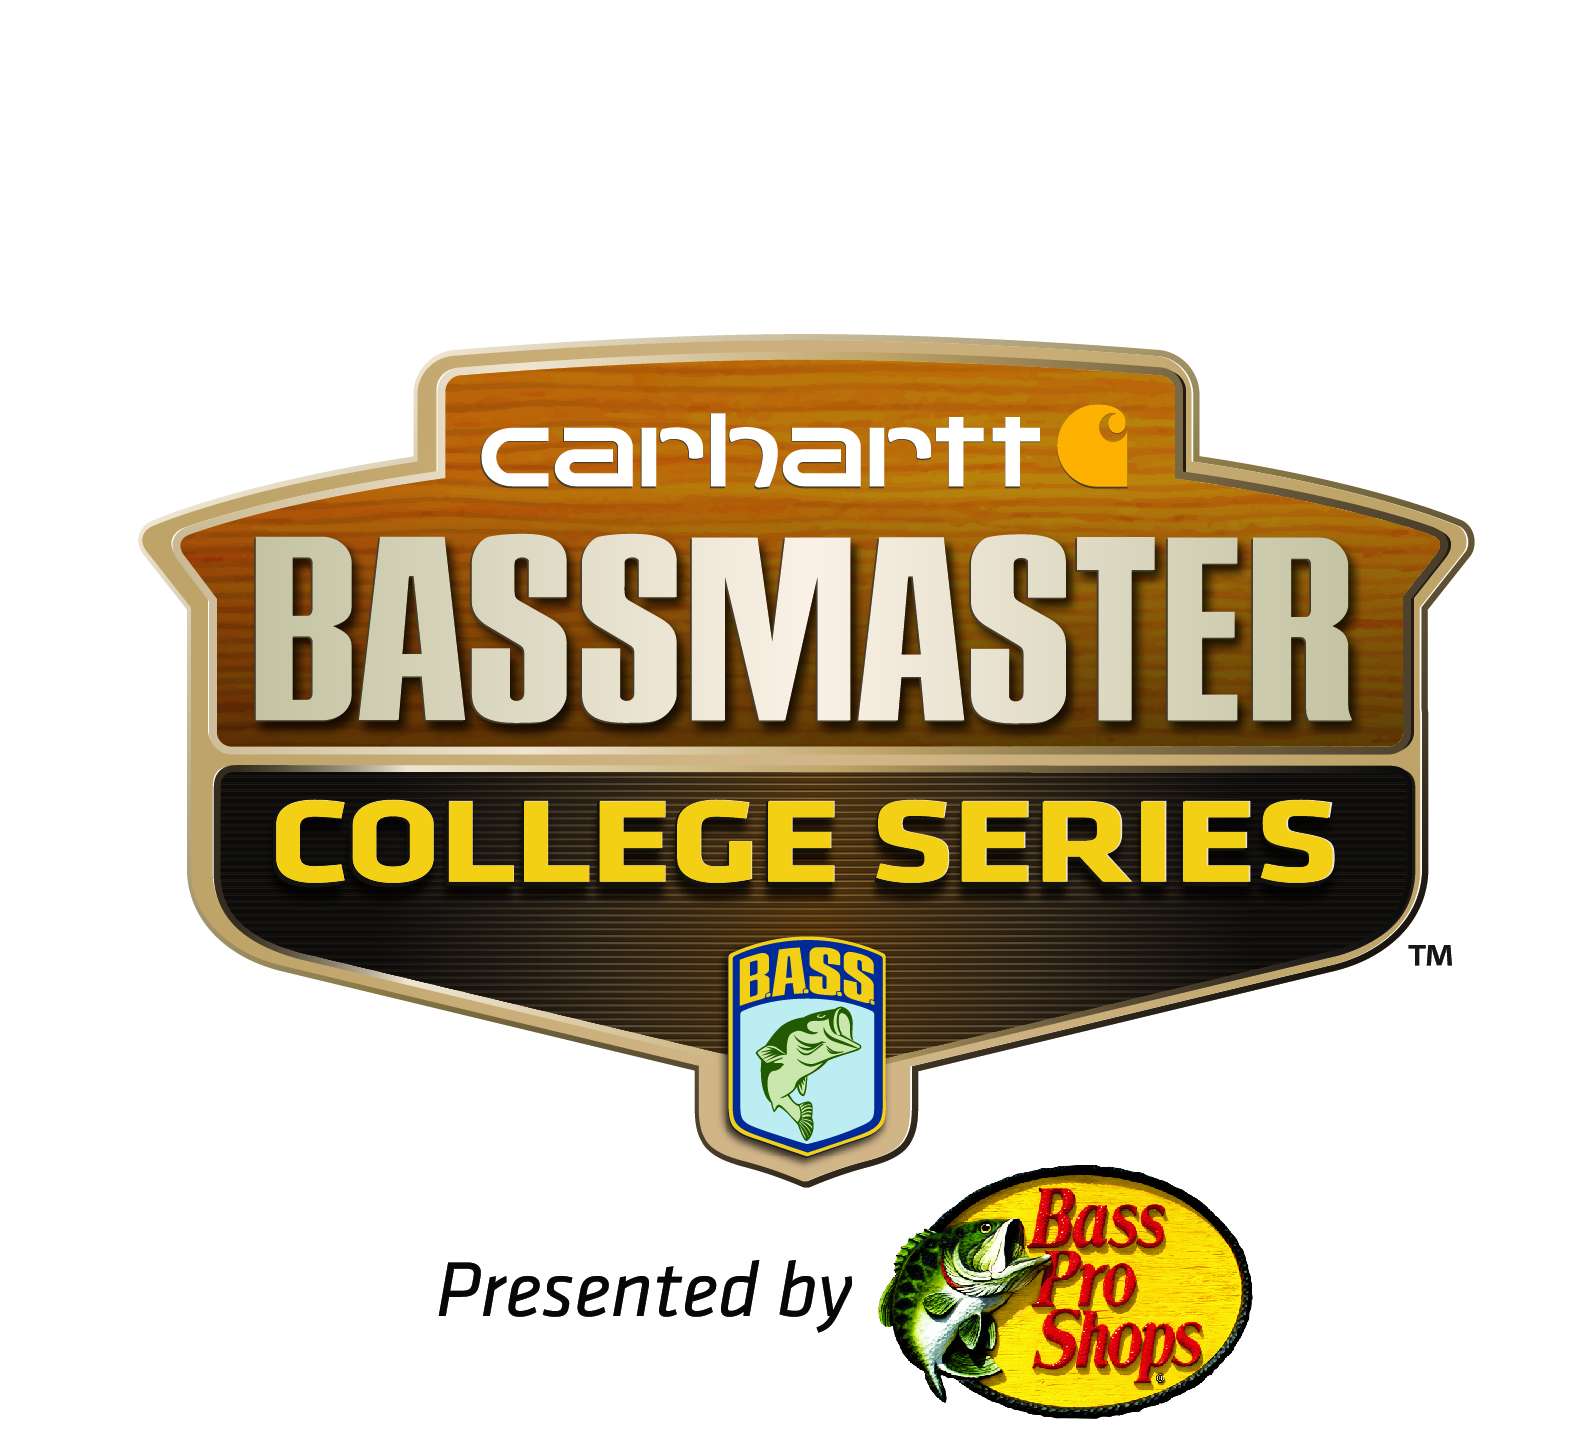 The Carhartt Bassmaster College Series Classic Bracket is one of the most important tournaments in the eyes of college anglers. It's an event where dreams can come true. Even for the seven anglers that don't win, they acknowledge the opportunities that are in their future because of this experience. Former Classic Bracket winners and two Elite Series pros that fell short in the Bracket tell their story of what this week meant to them.